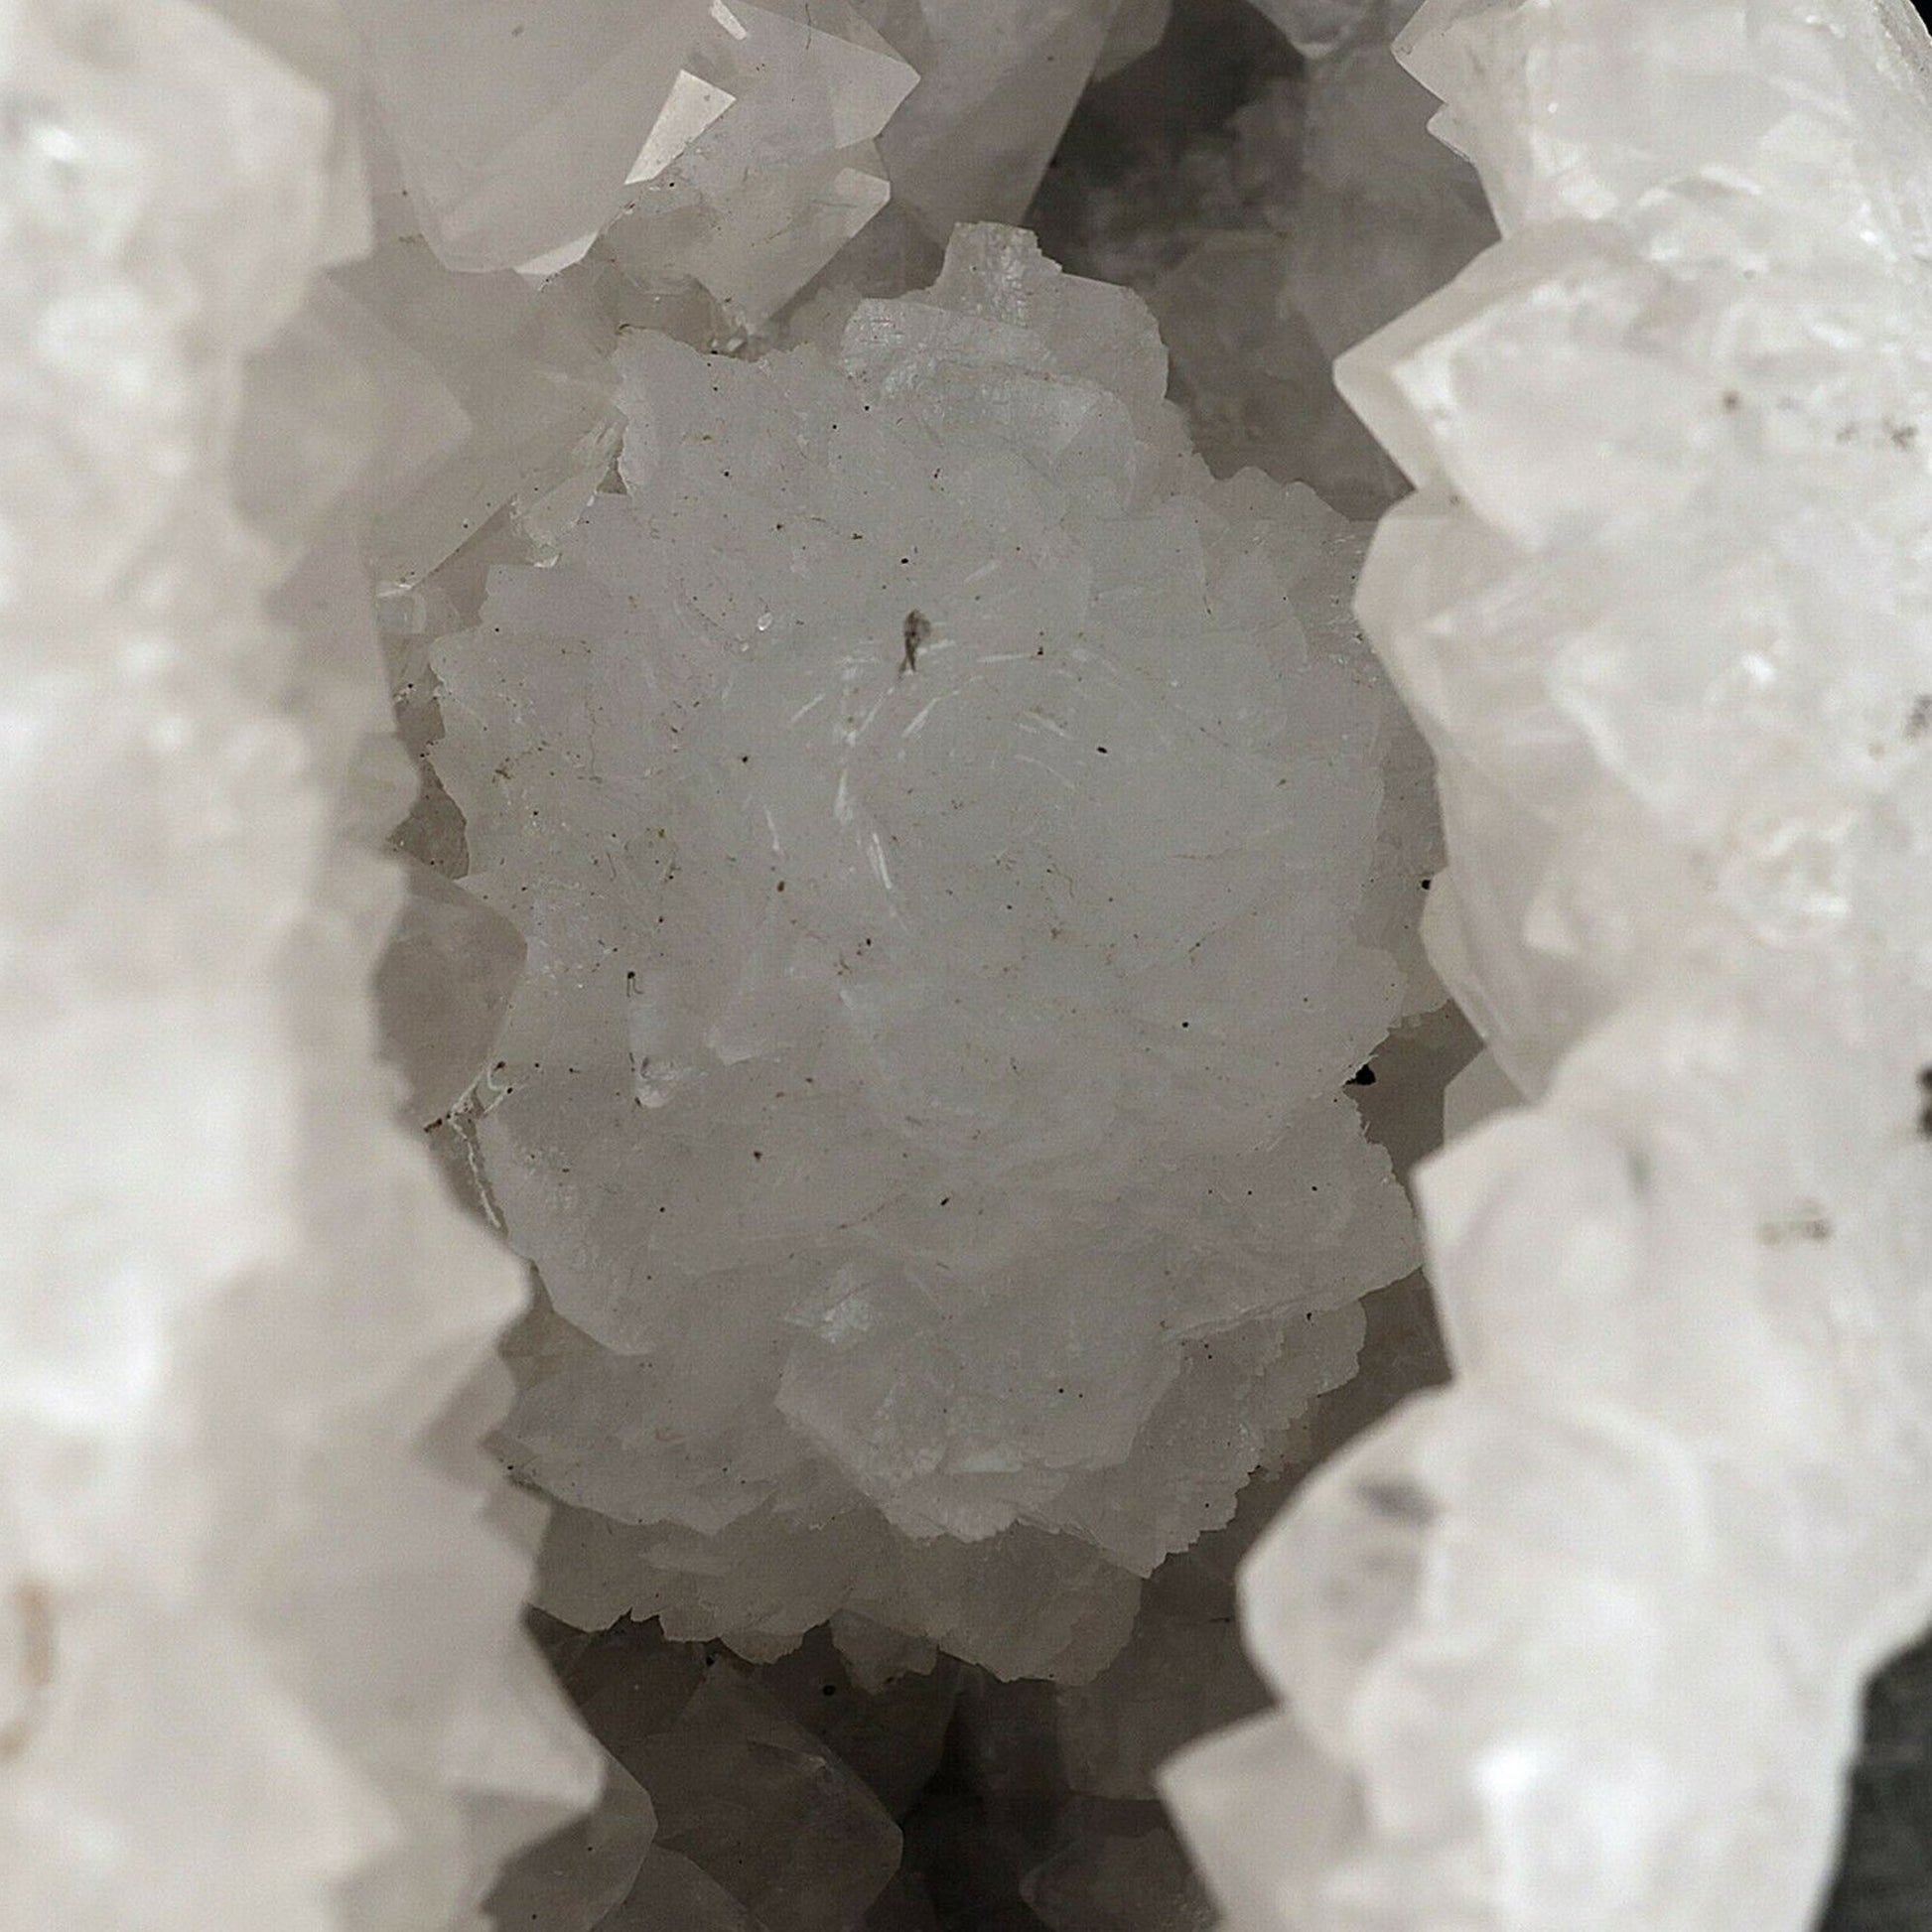 Goosecreekite Rare Mineral on MM Quartz Natural Mineral Specimen # B 3…  https://www.superbminerals.us/products/goosecreekite-rare-mineral-on-mm-quartz-natural-mineral-specimen-b-3681  FeaturesVery fine specimen of the very rare zeolite mineral goosecreekite. The goosecreekite&nbsp; has grown in a translucent white nodular formation of goosecreekite in polycrystalline aggregates. The crystals on this beauty are sharp with white coloring and vitreous luster.&nbsp; The goosecreekite sits inside a basal